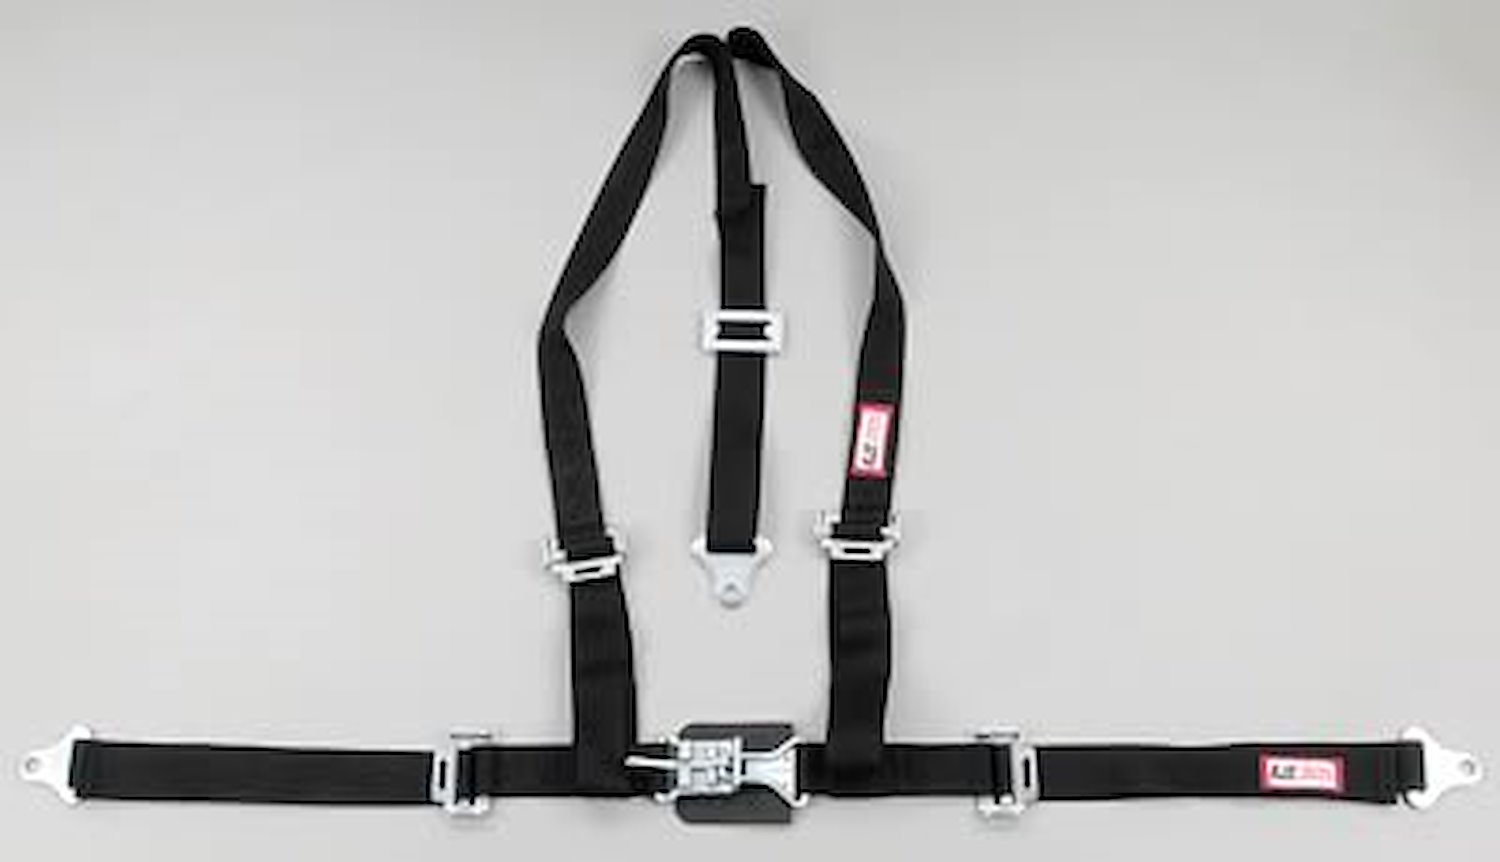 NON-SFI L&L HARNESS 3 PULL UP Lap Belt w/adjuster 2 S.H. V ROLL BAR Mount ALL WRAP ENDS GRAY